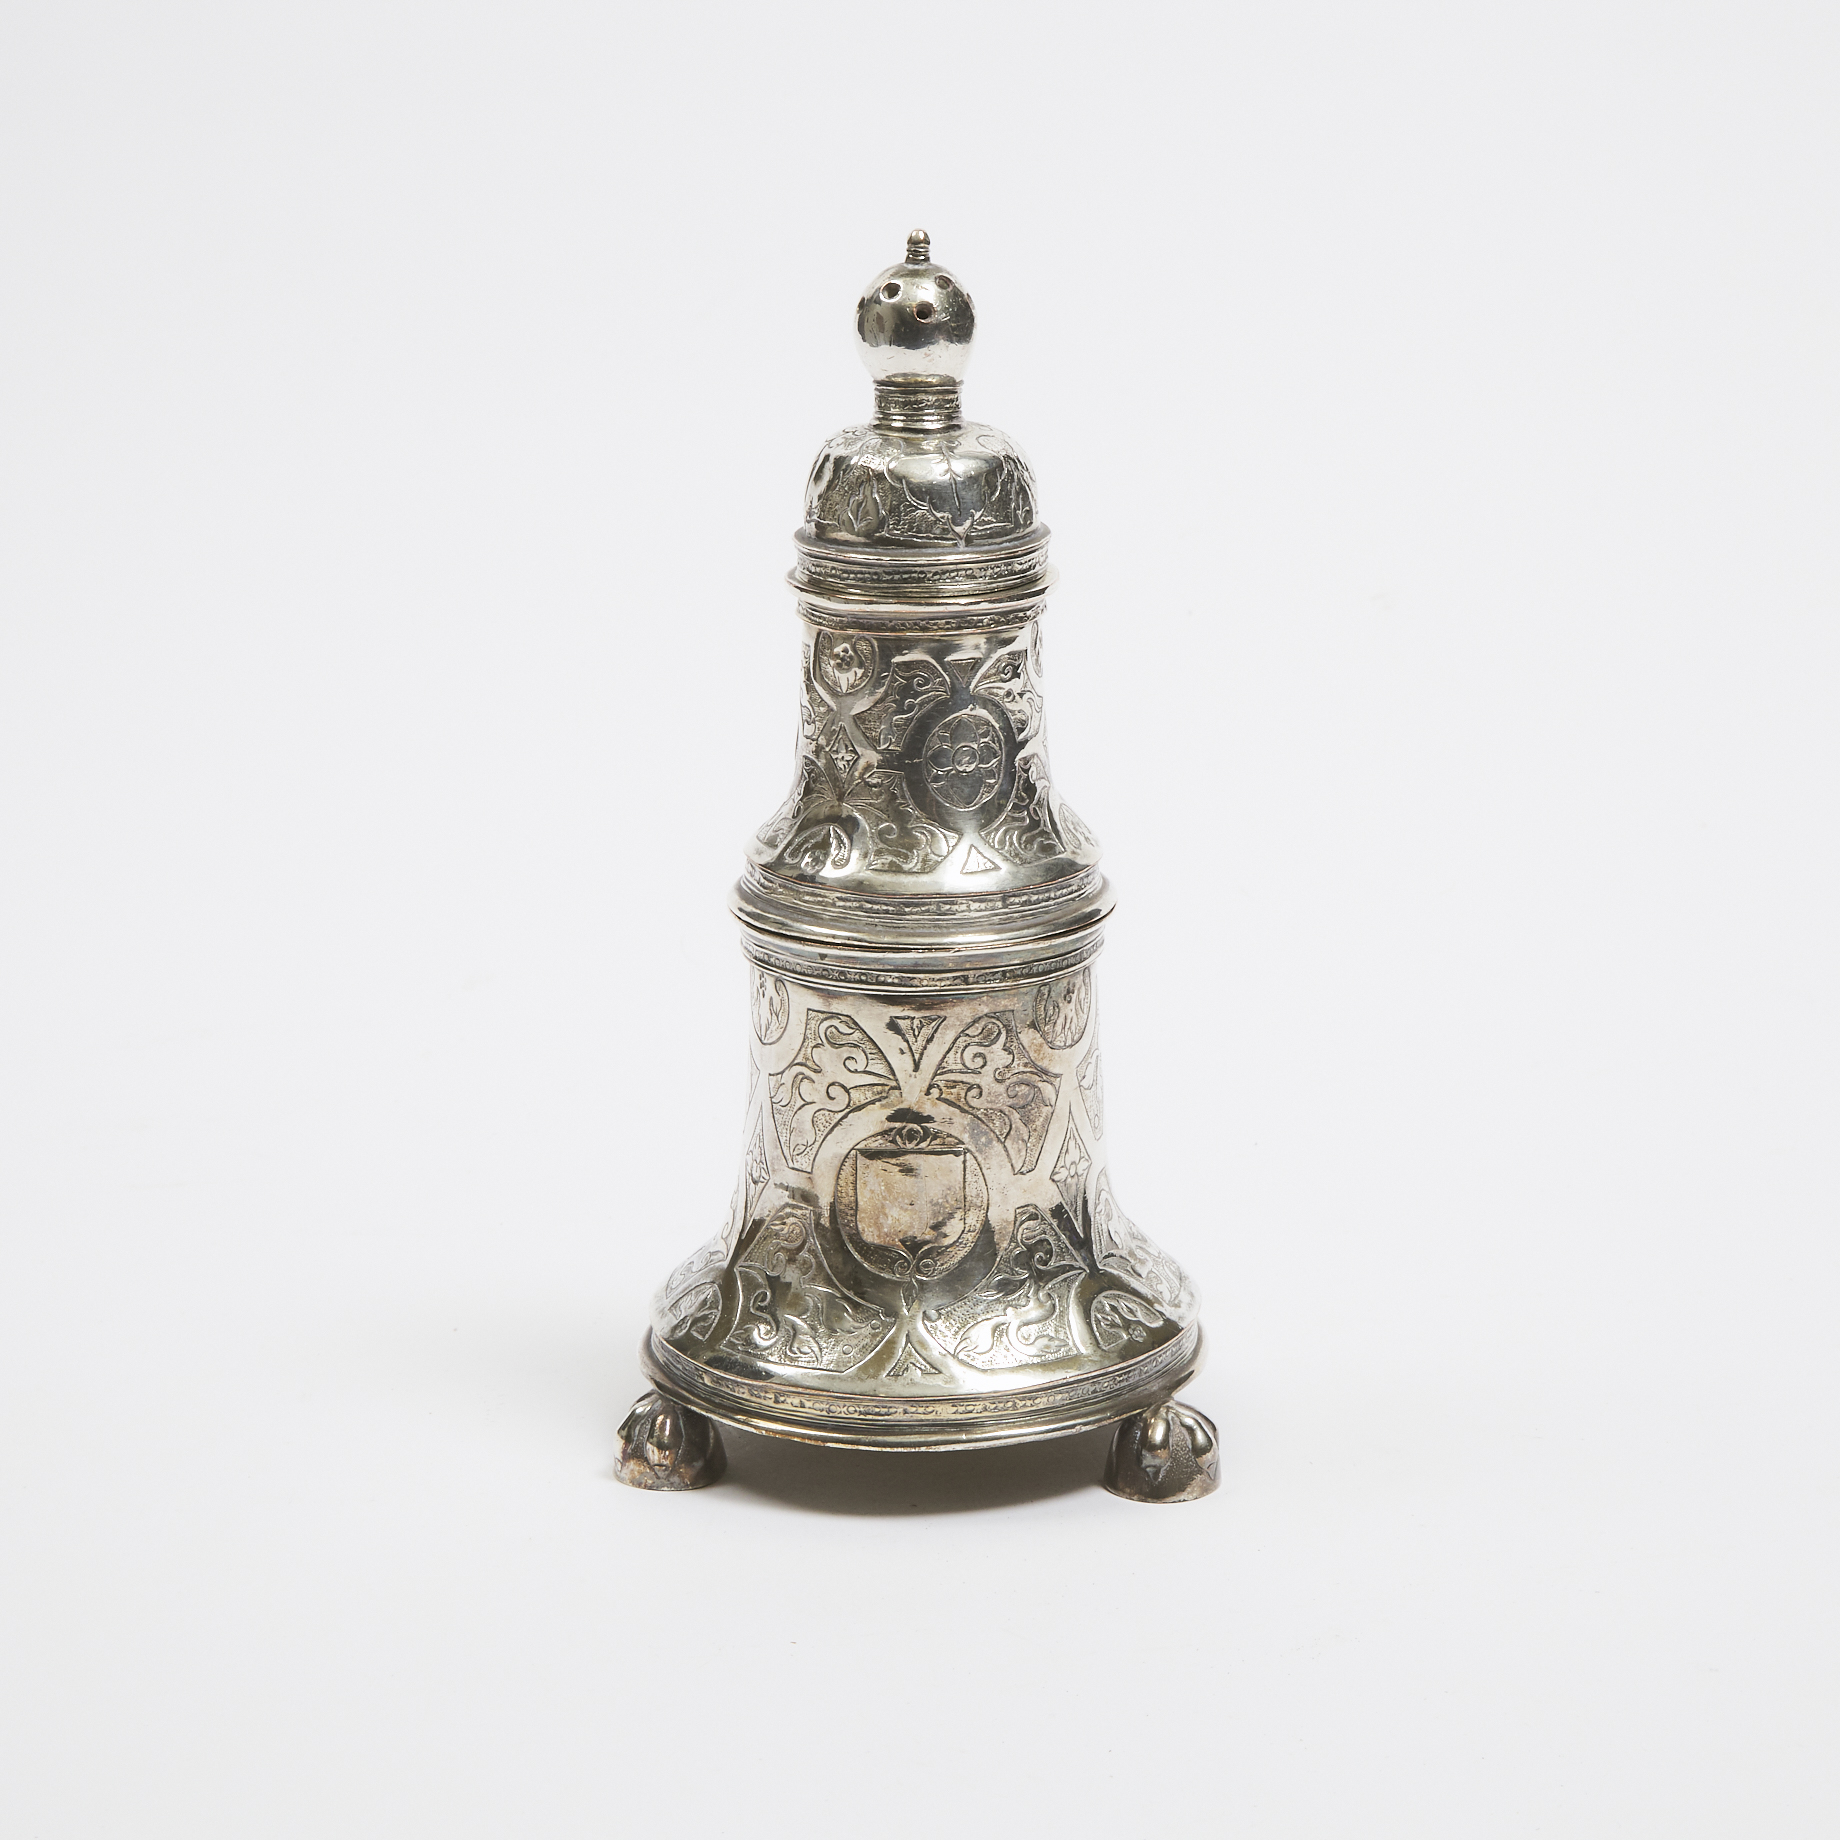 Victorian Reproduction of the Stoke Prior Standing Bell Double Salt, 19th century